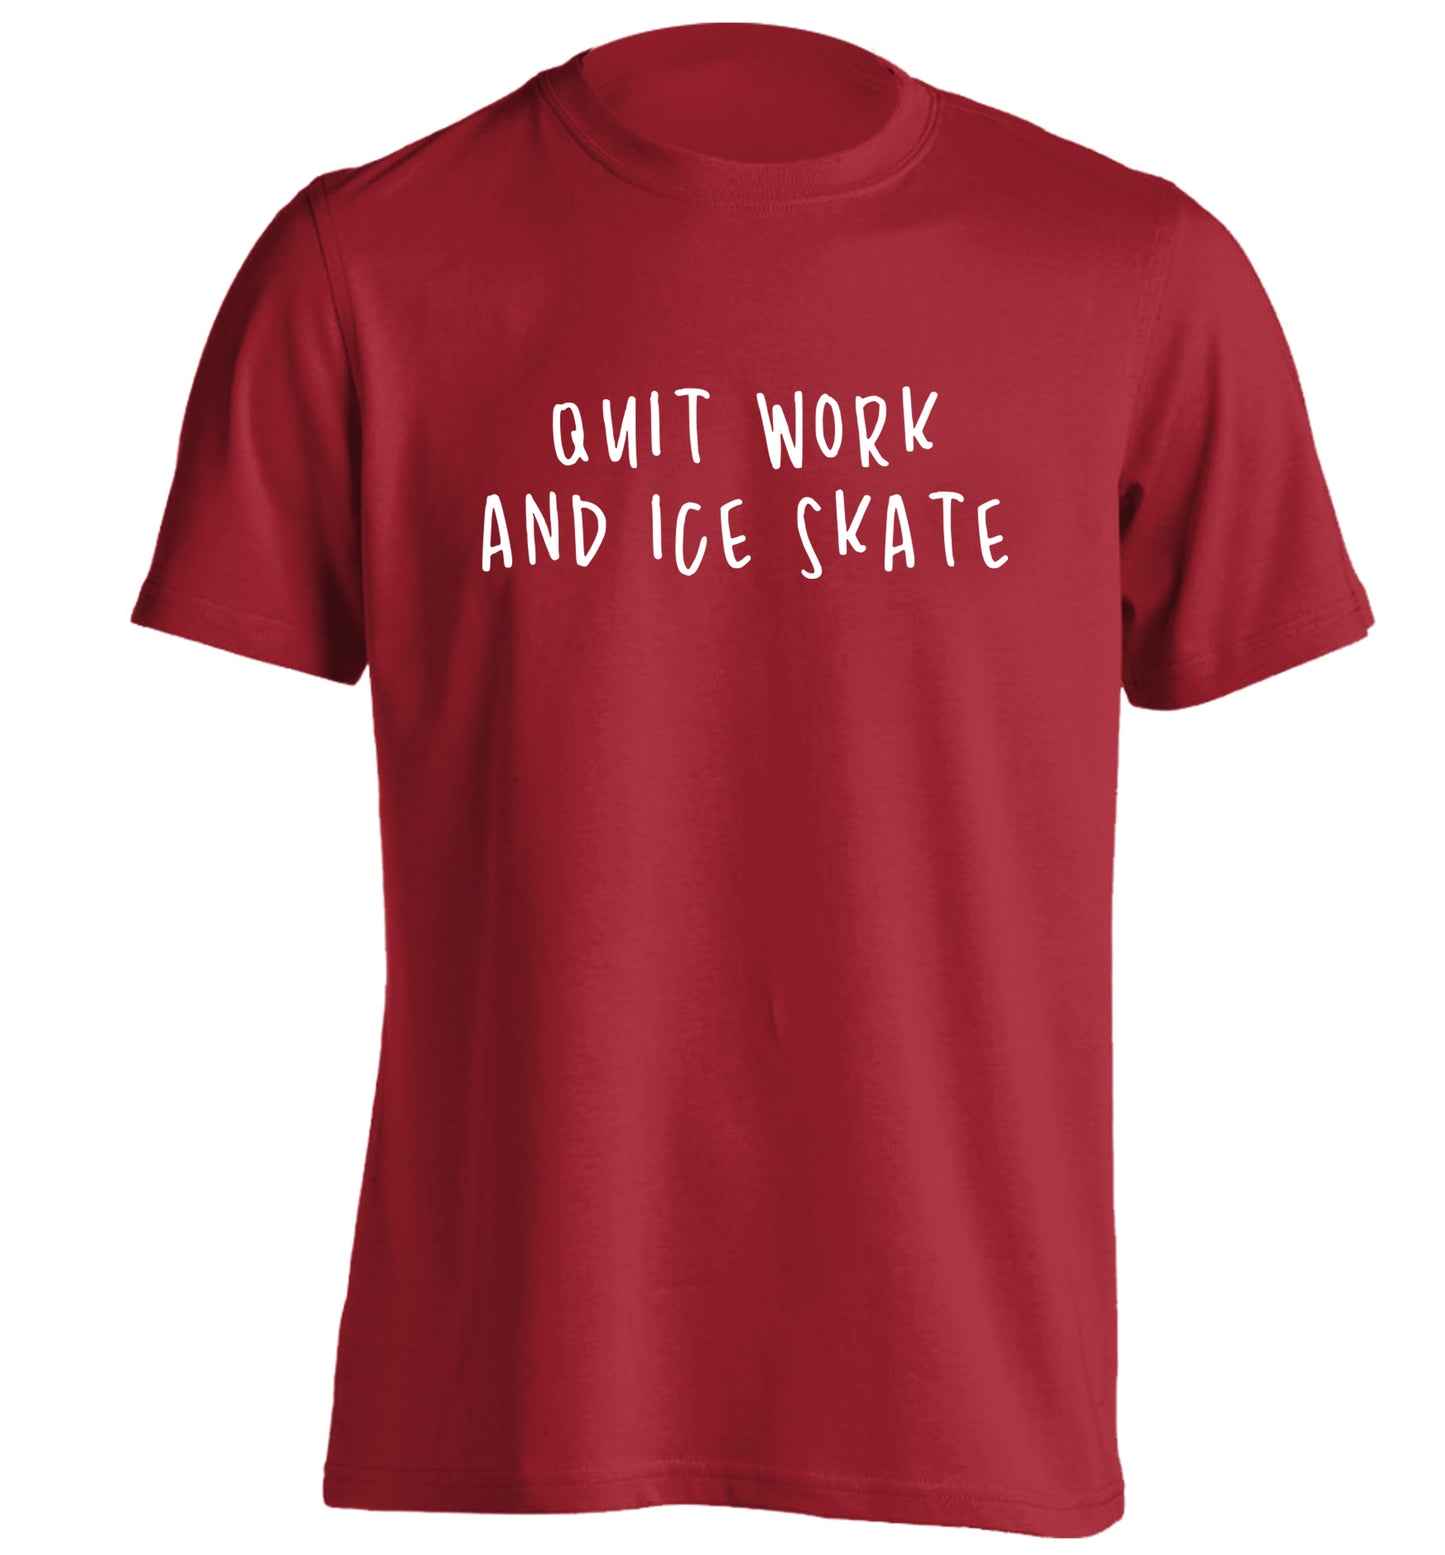 Quit work ice skate adults unisexred Tshirt 2XL